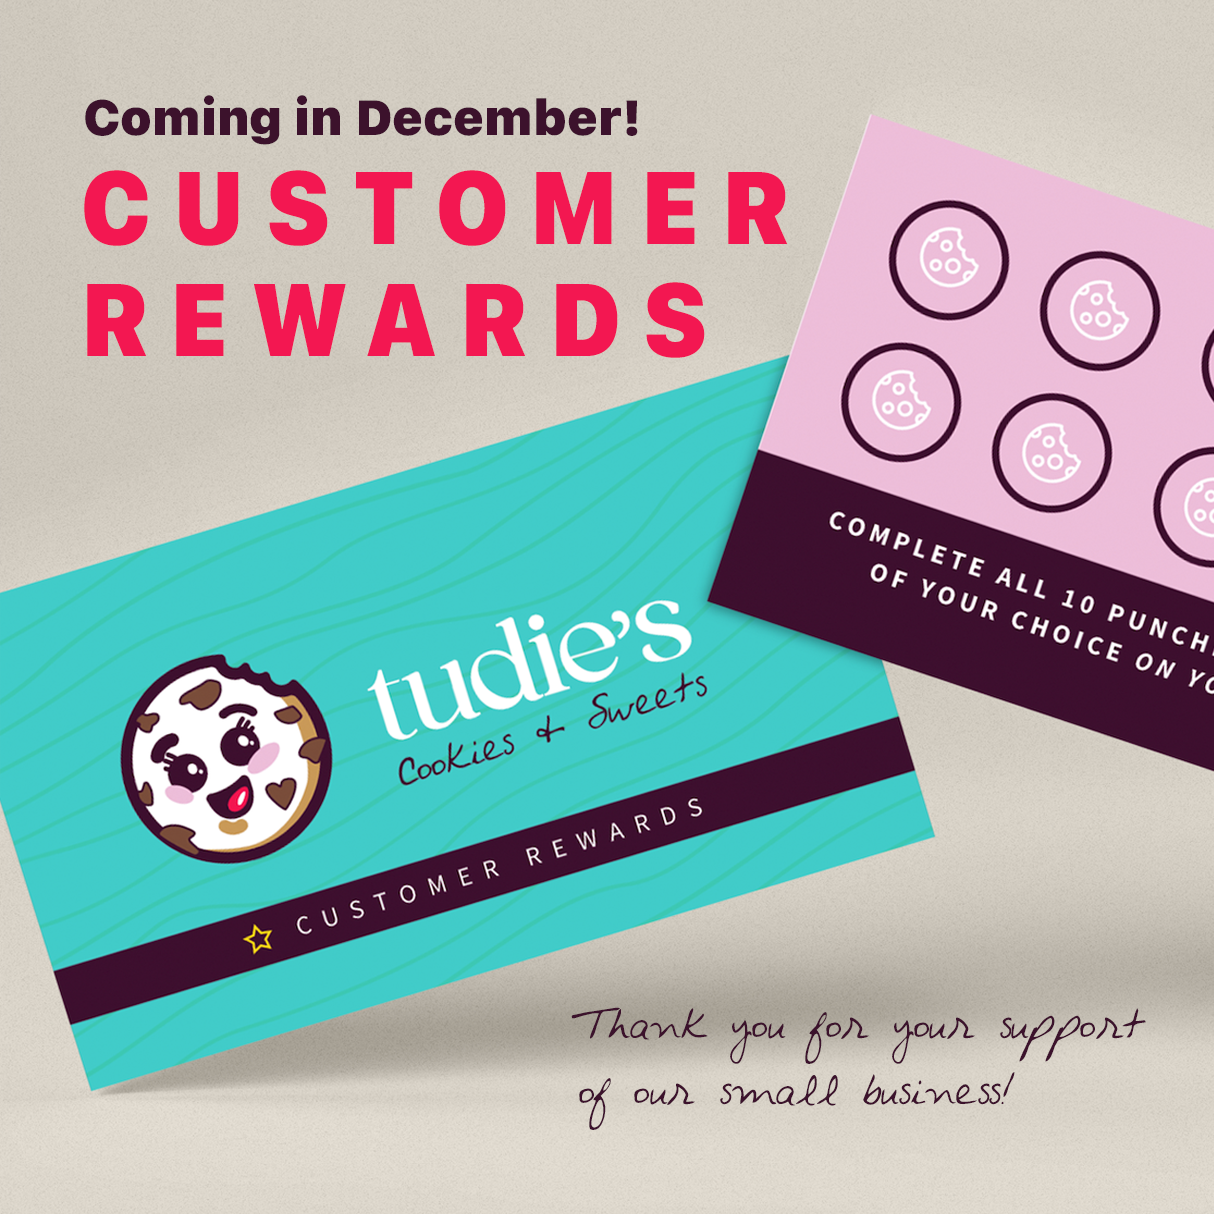 customer-rewards-cards-now-available-tudie-s-cookies-sweets